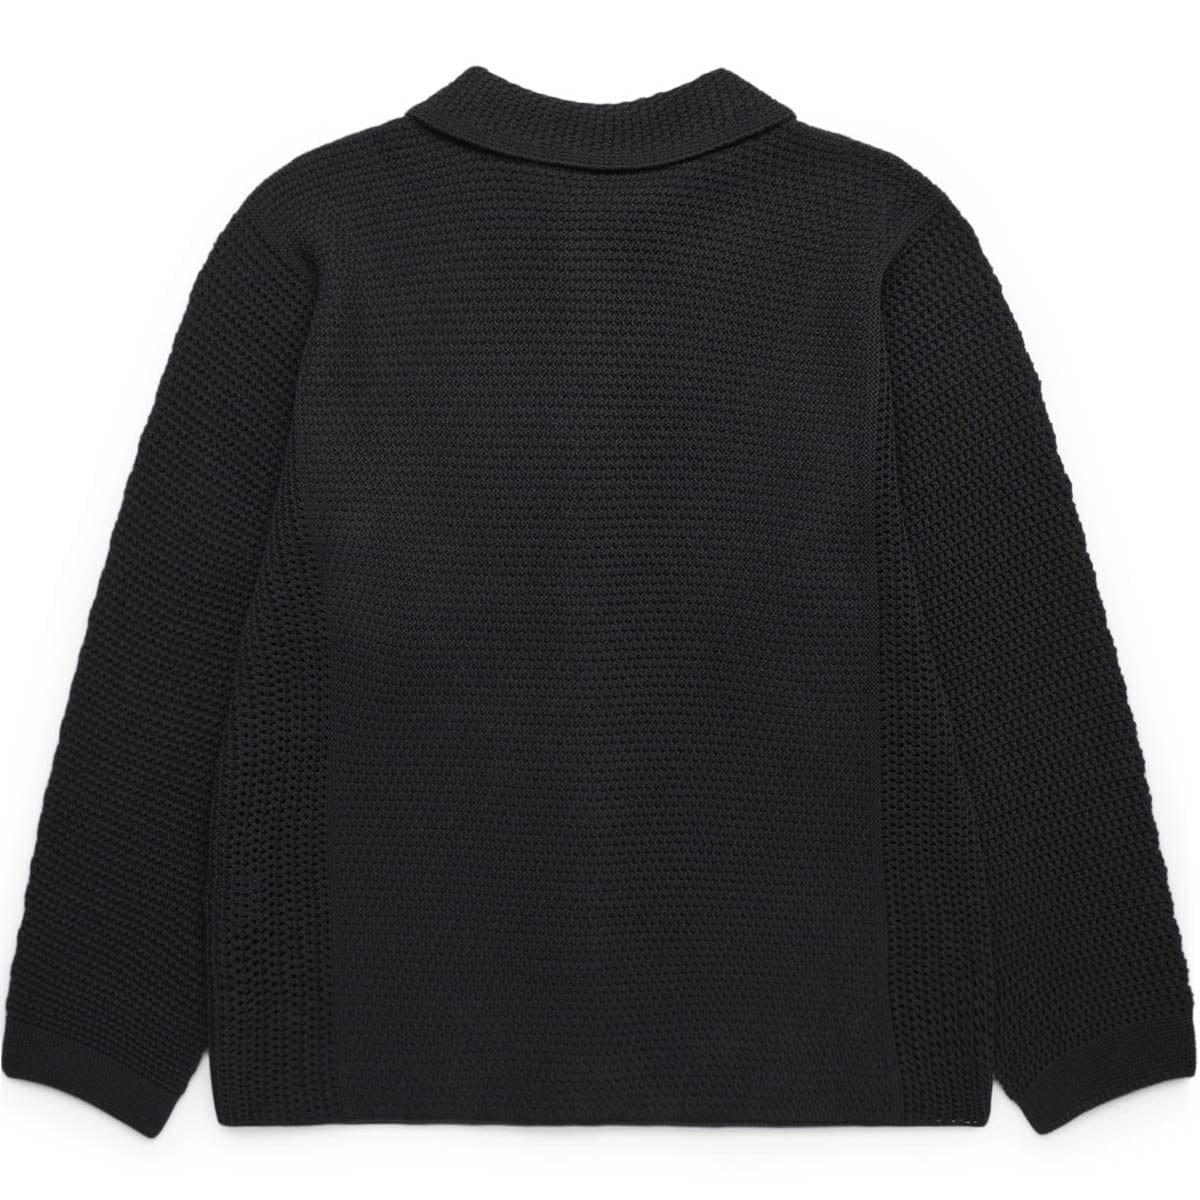 Homme Plissé Issey Miyake Shirts DARKNESS BROWN / O/S RUSTIC KNIT TOP